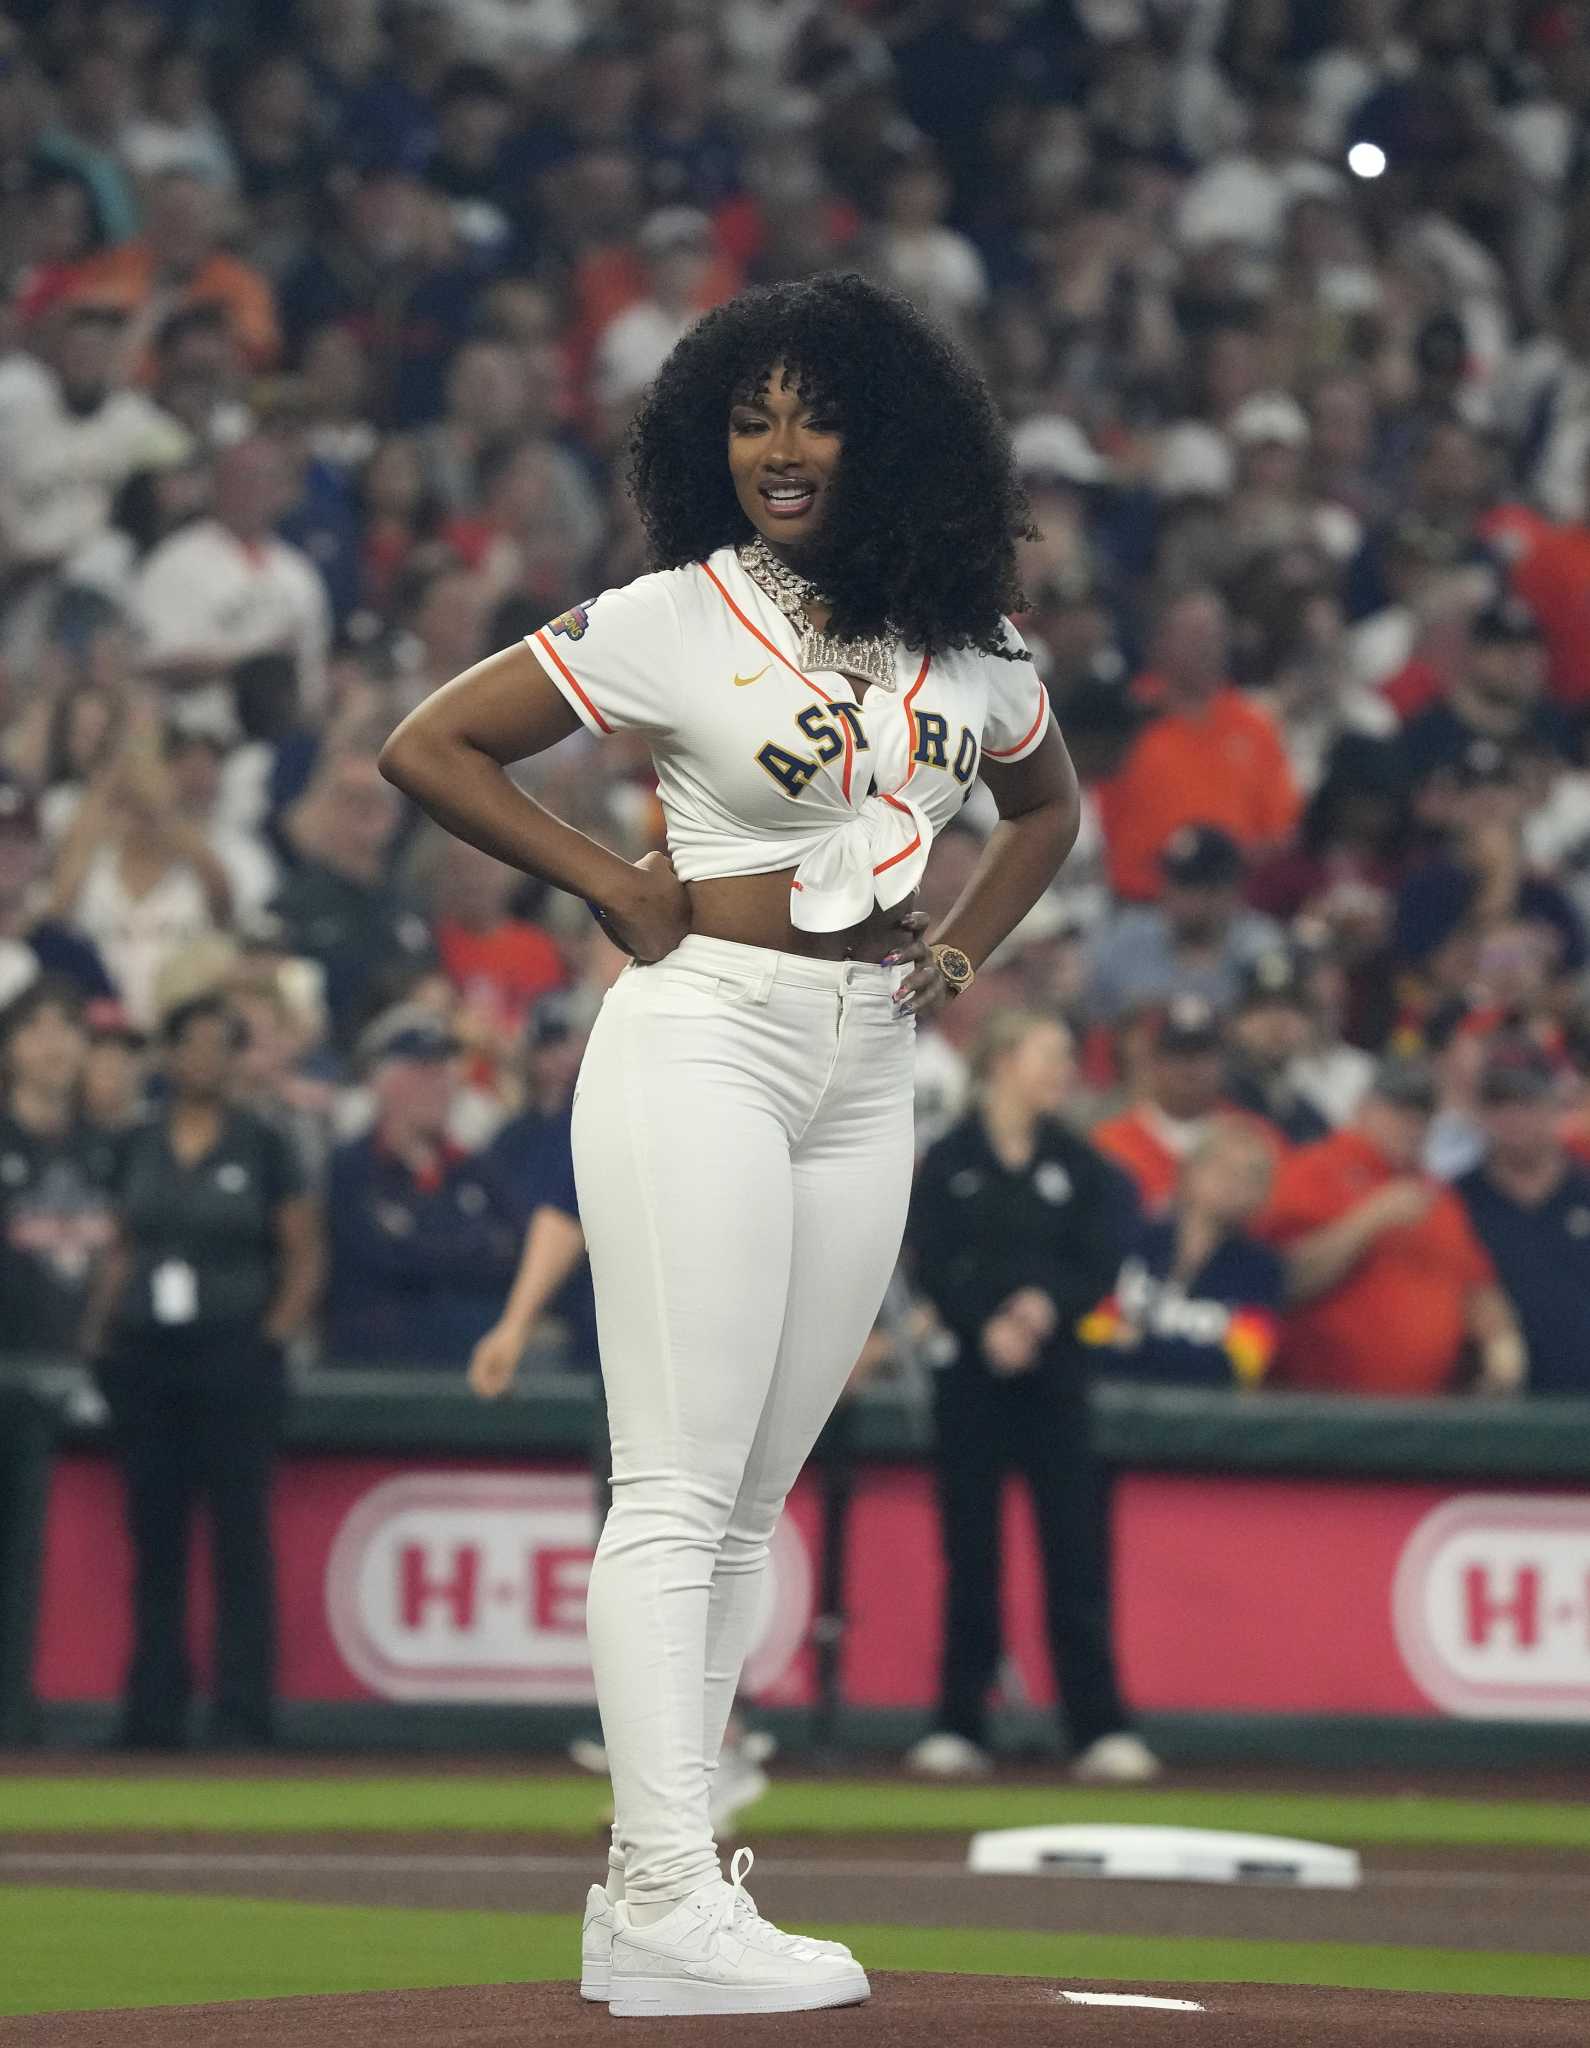 The Most Memorable Looks from MLB Opening Day